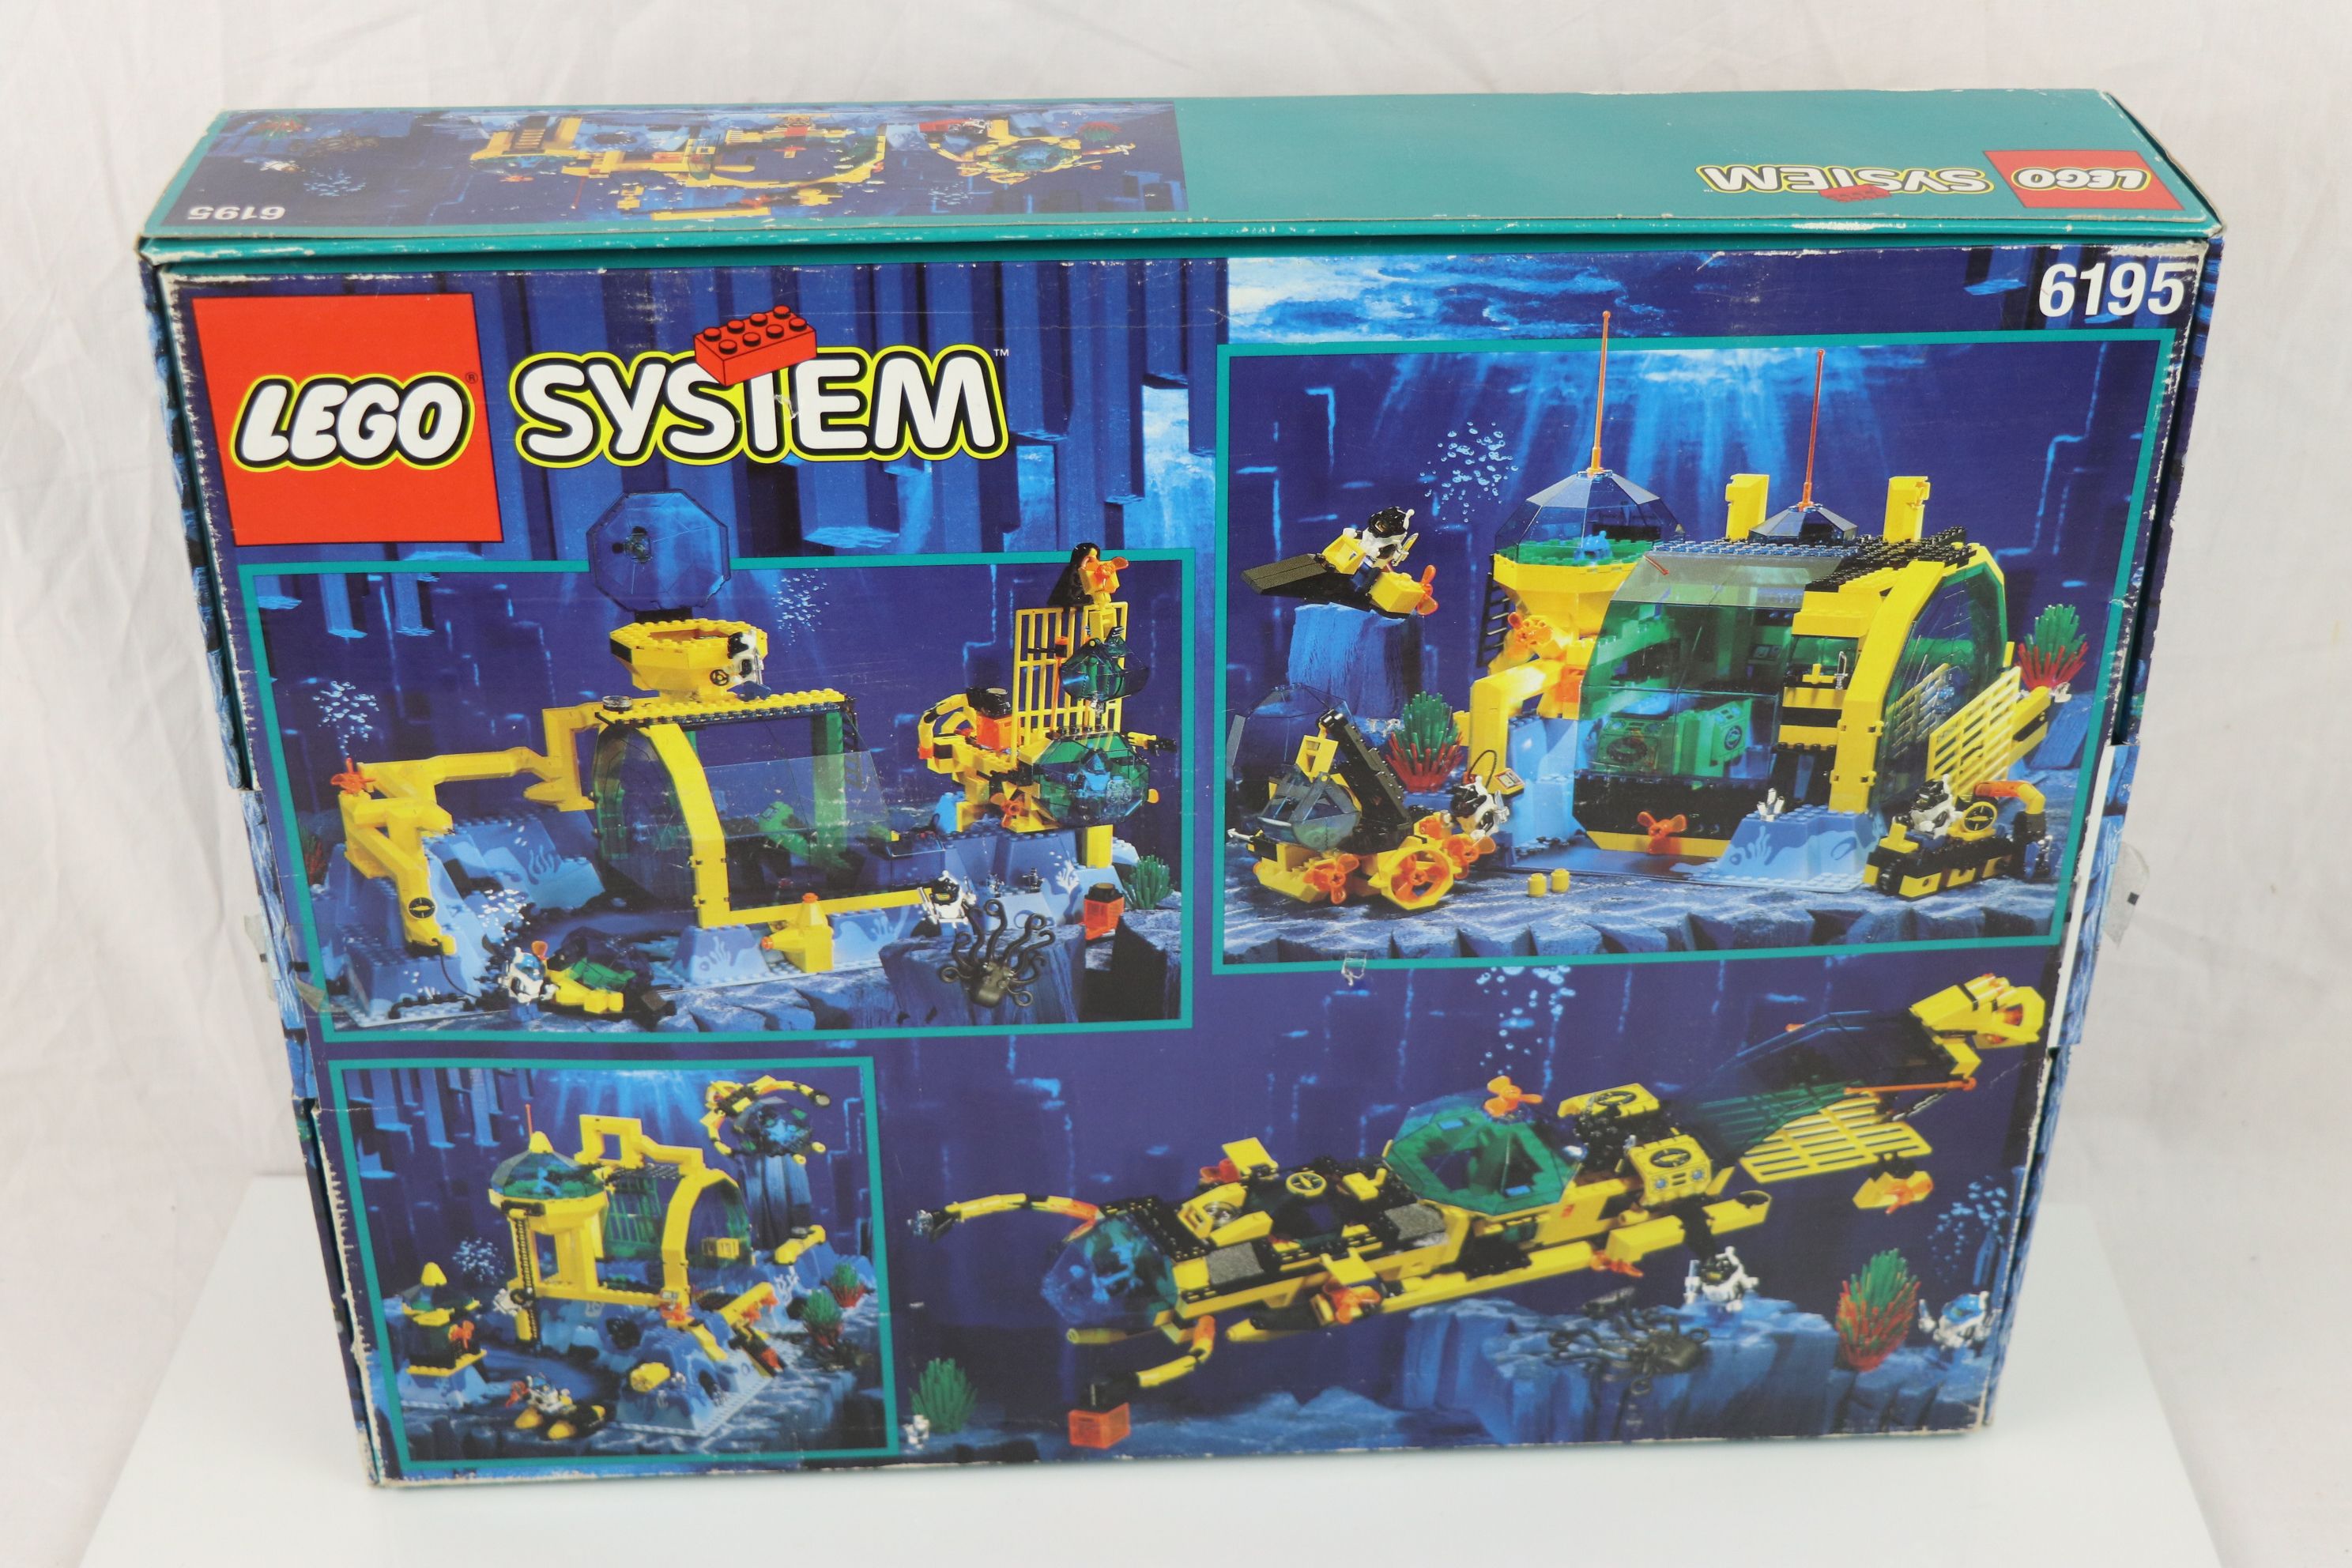 Lego - Boxed Lego System 6195 Aquanauts Neptune Discovery set unchecked but appearing complete - Image 16 of 16